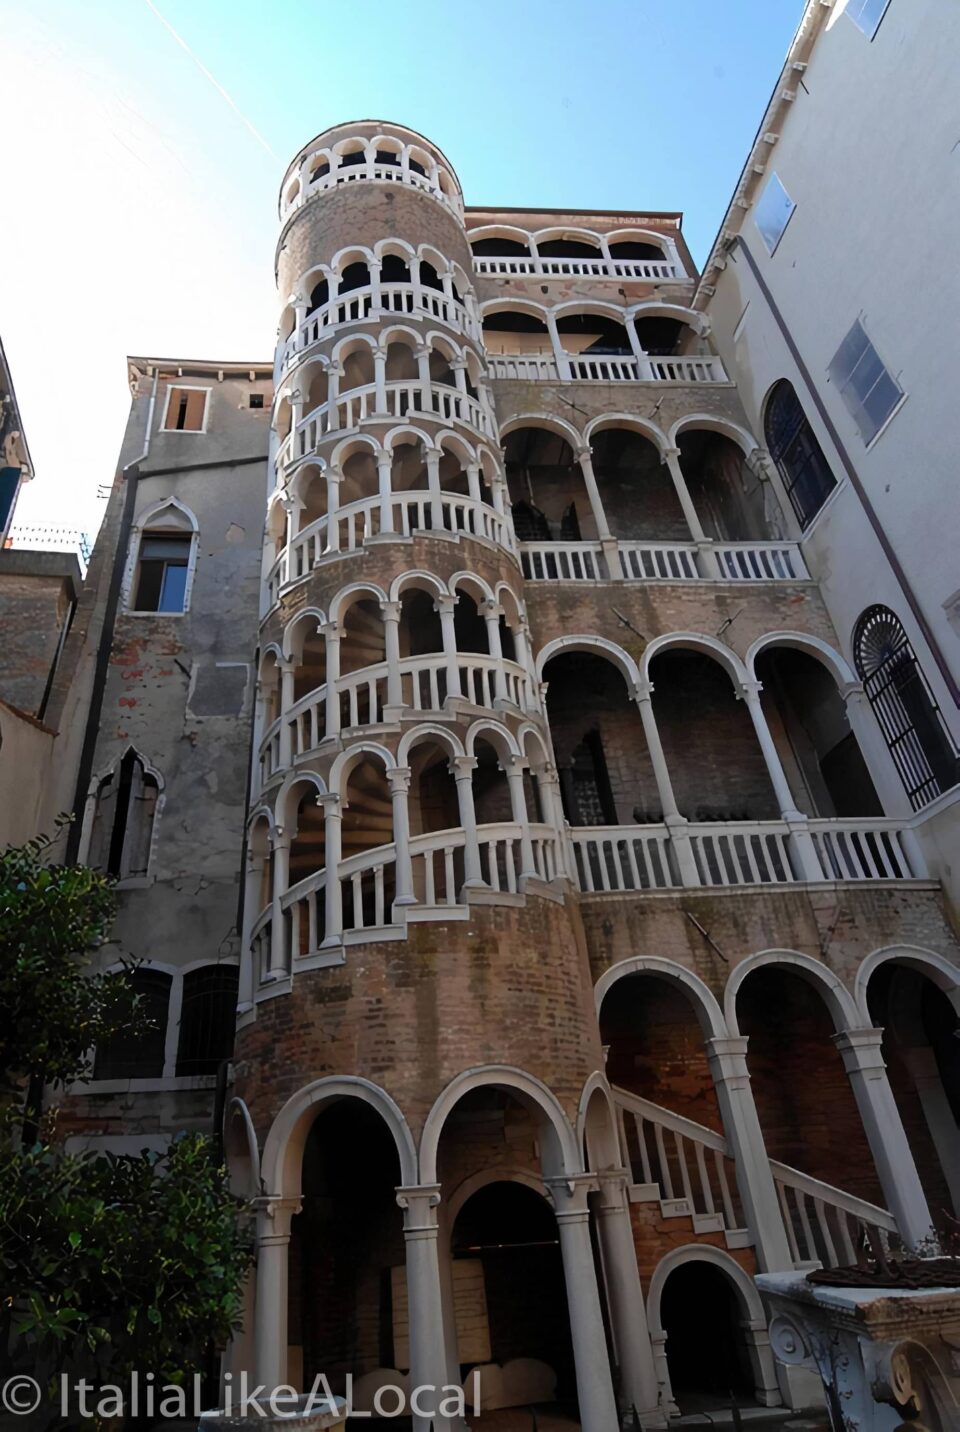 The Contarini del Bovolo spiral staircase resembling a snail hence the name Bovolo which is the venetian term for snails